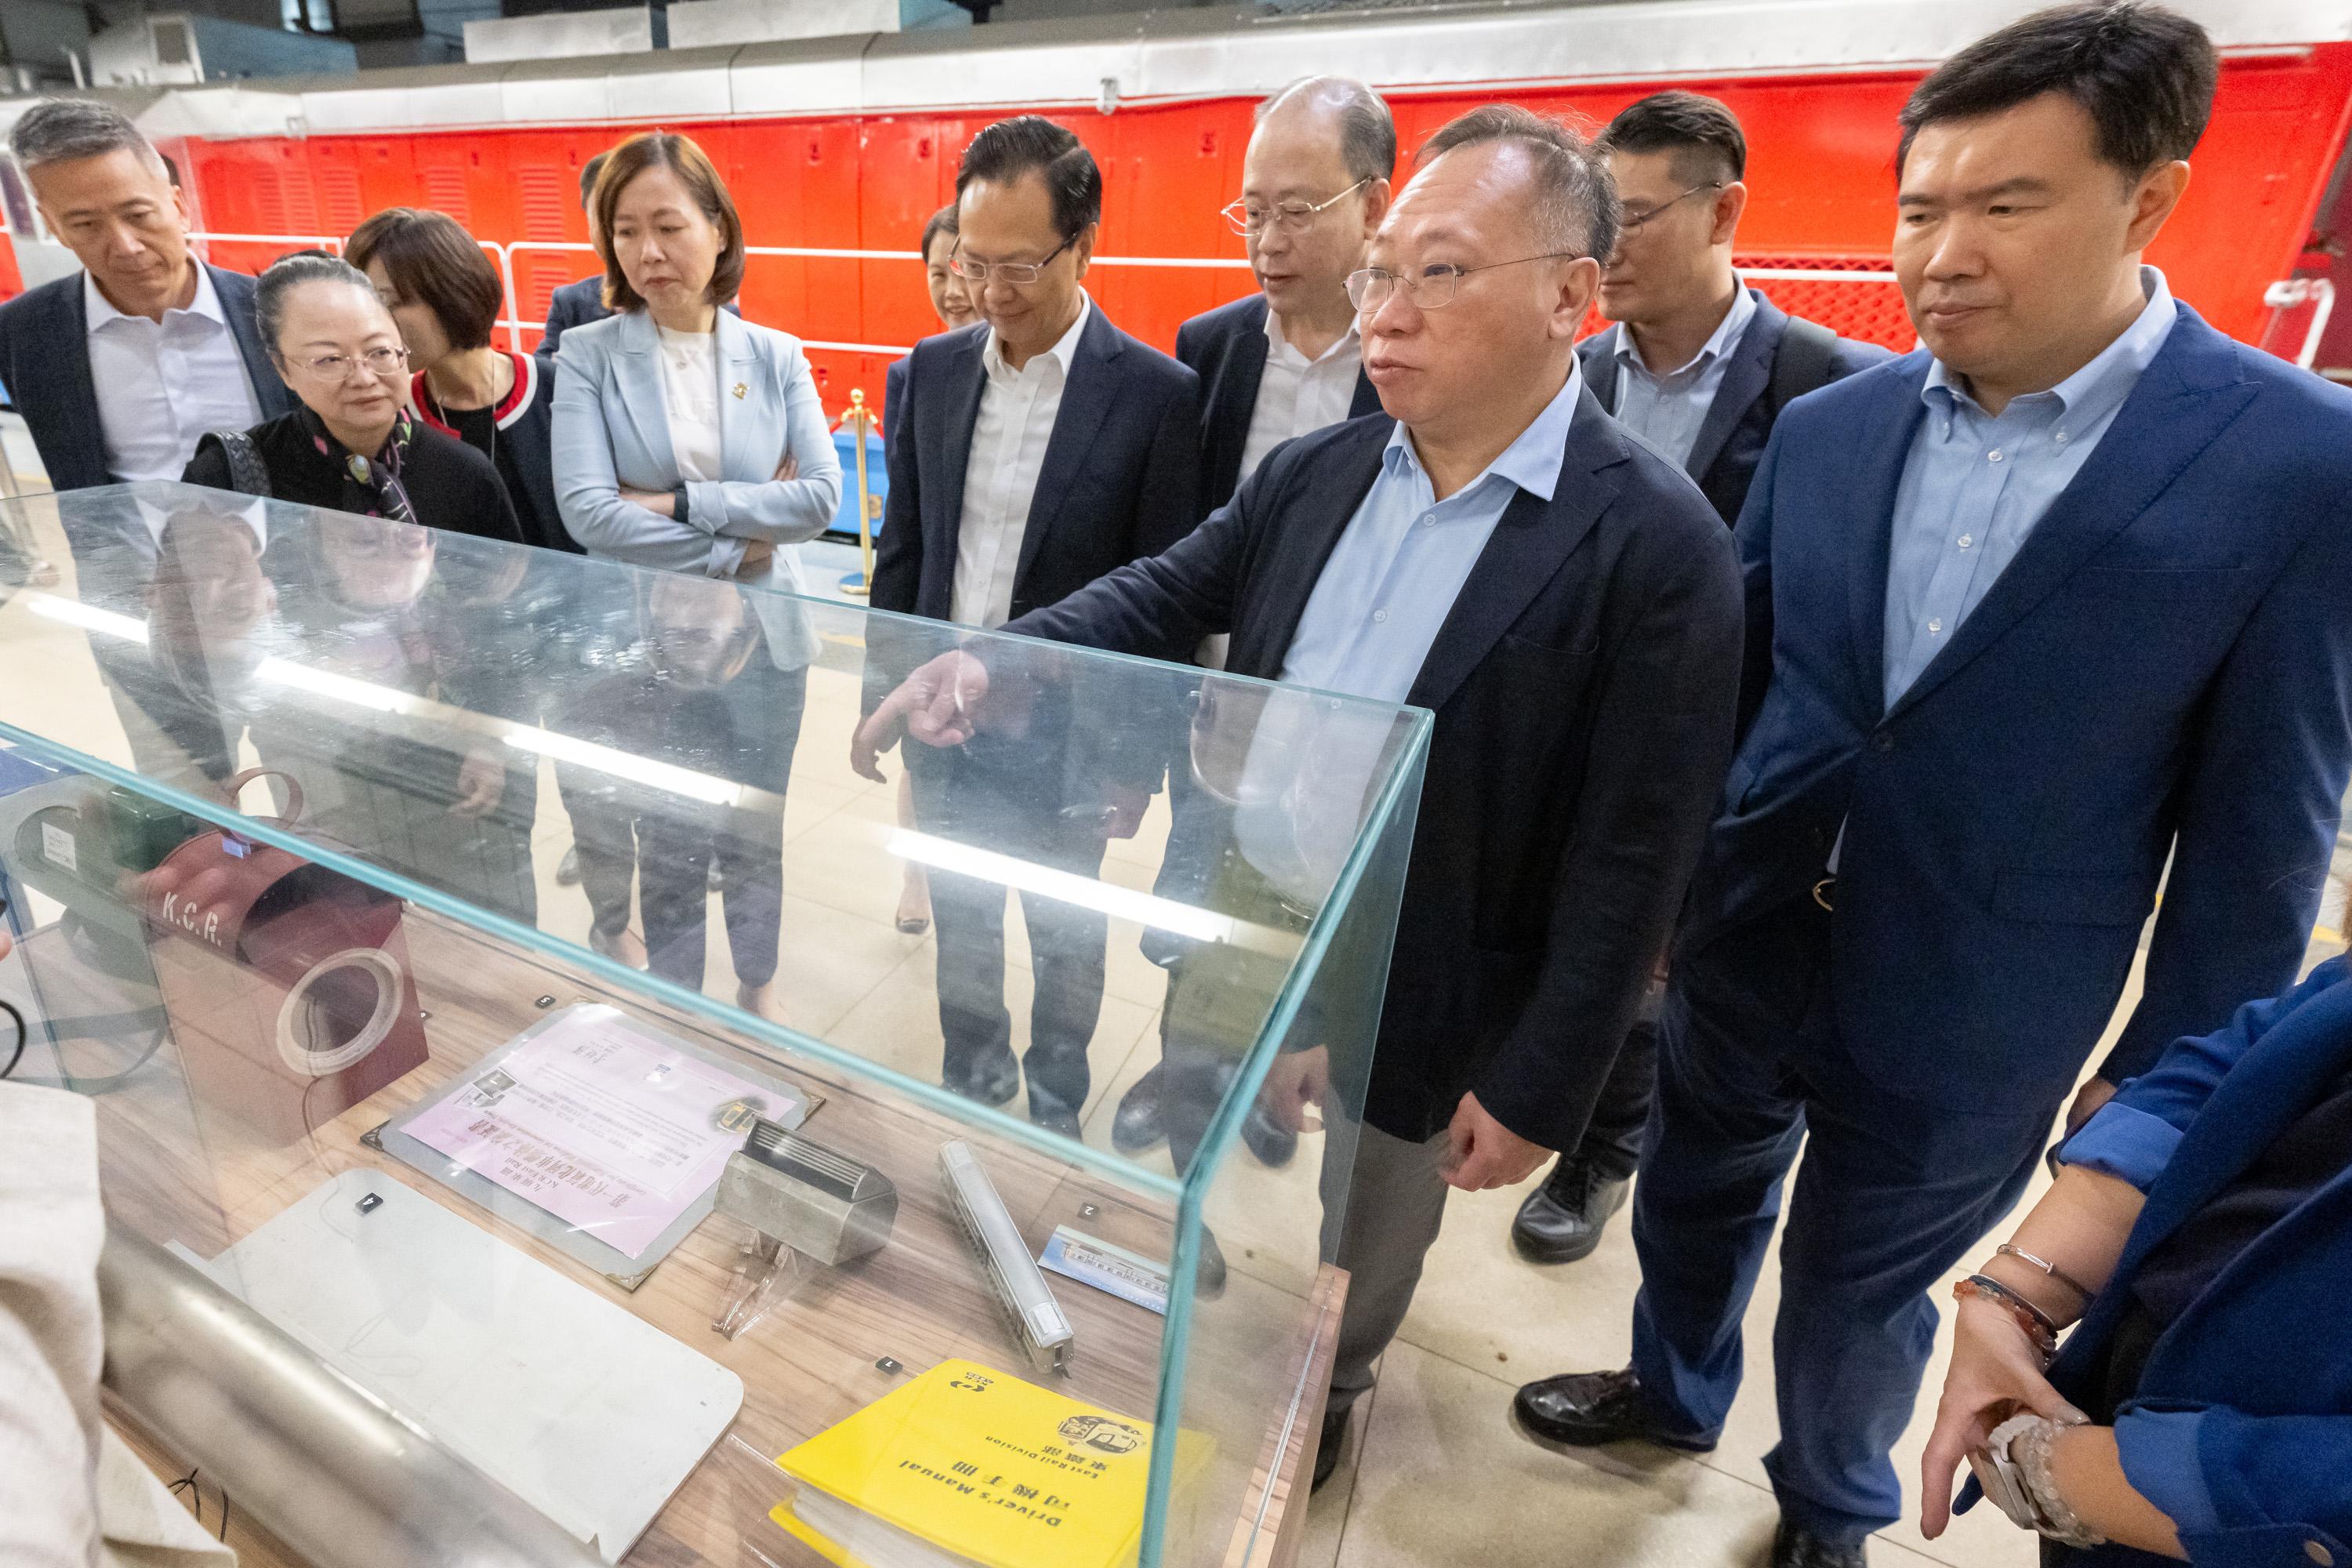 The Legislative Council (LegCo) Panel on Transport visited the "Station Rail Voyage" Exhibition of the MTR Corporation Limited at Hung Hom Station today (April 24). Photo shows LegCo Members receiving a briefing on the exhibits of "Station Rail Voyage" Exhibition by MTR representatives.